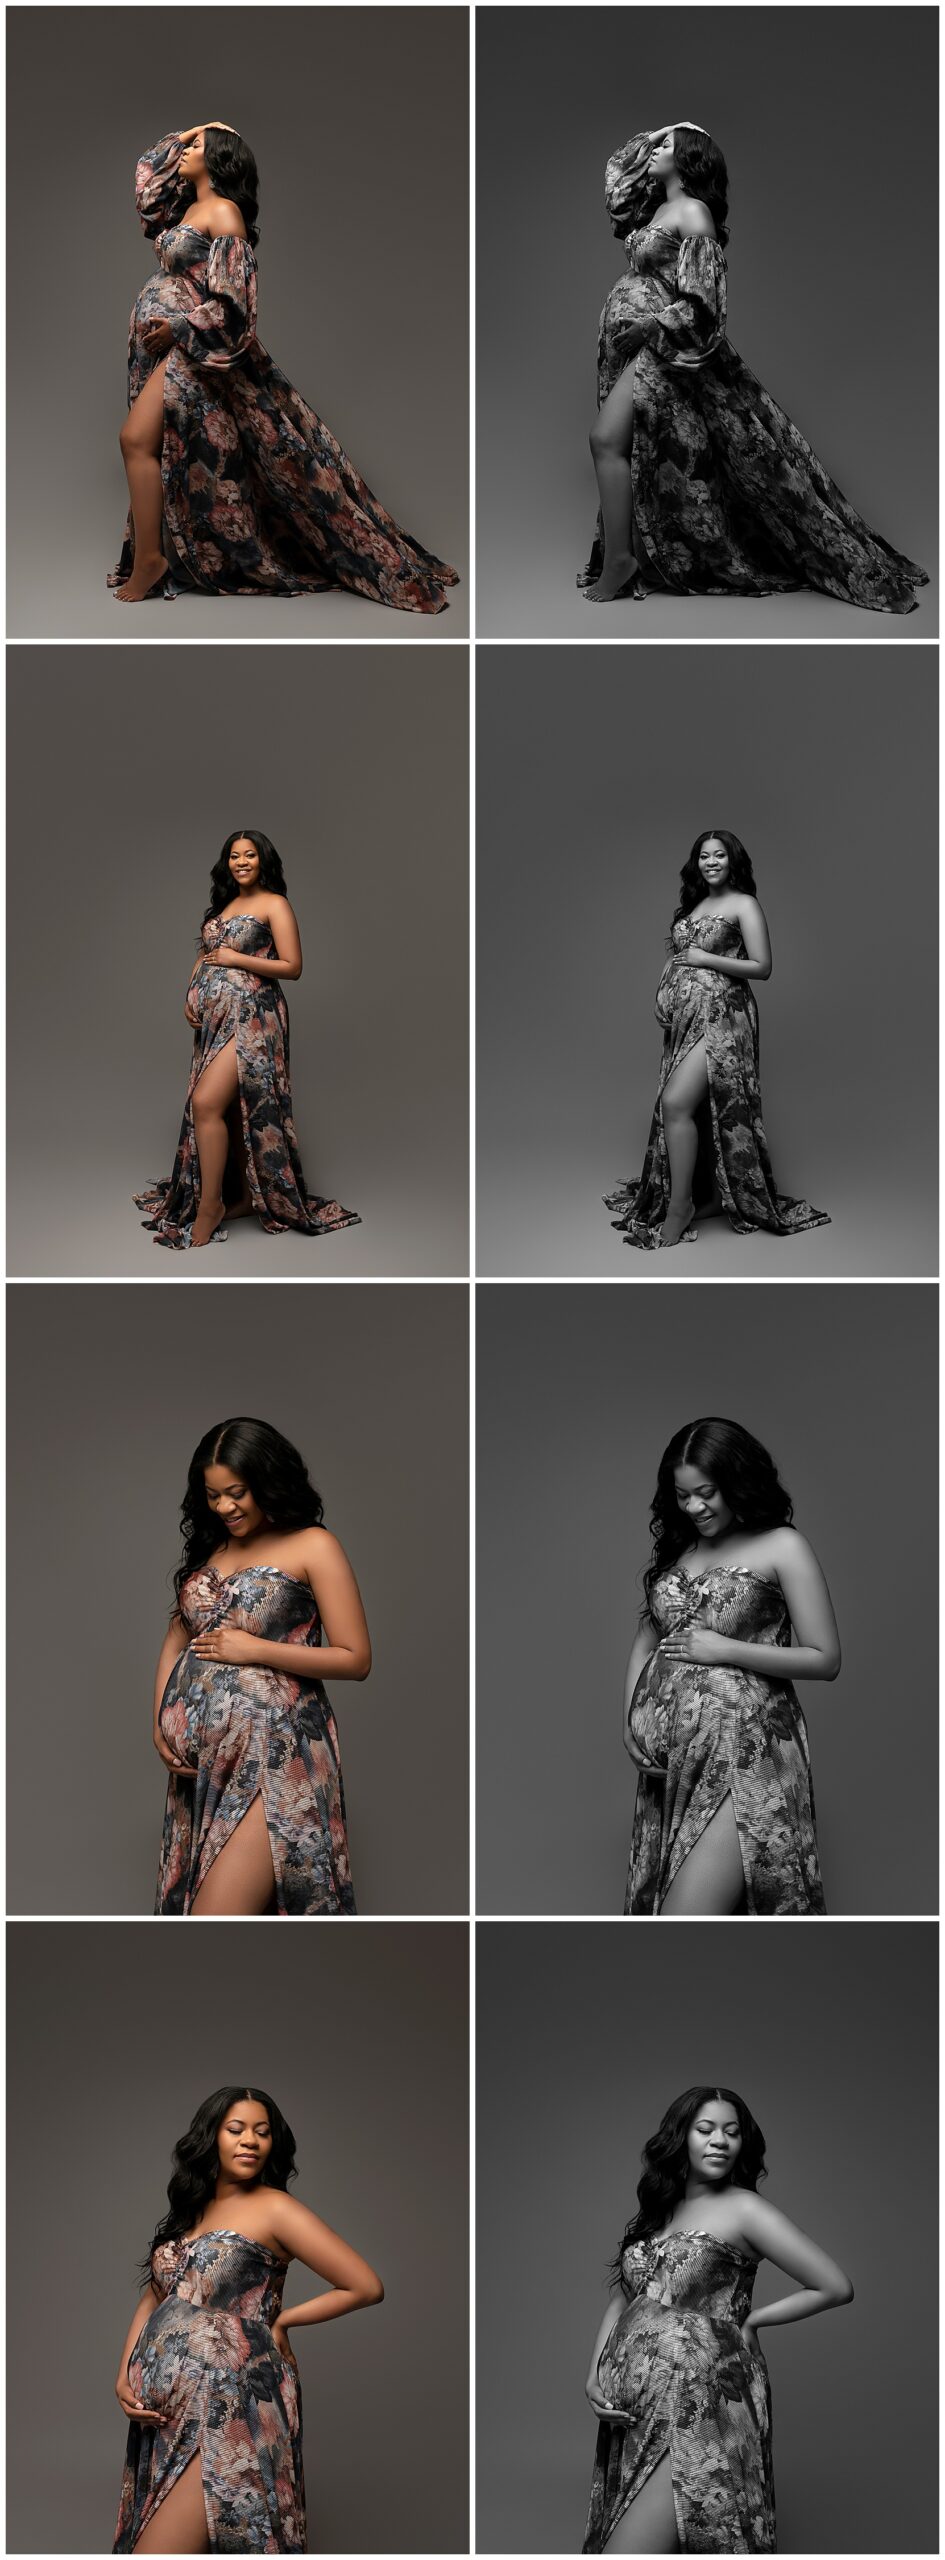 A series of several color and black and white maternity photos featuring a woman in a floral maternity gown